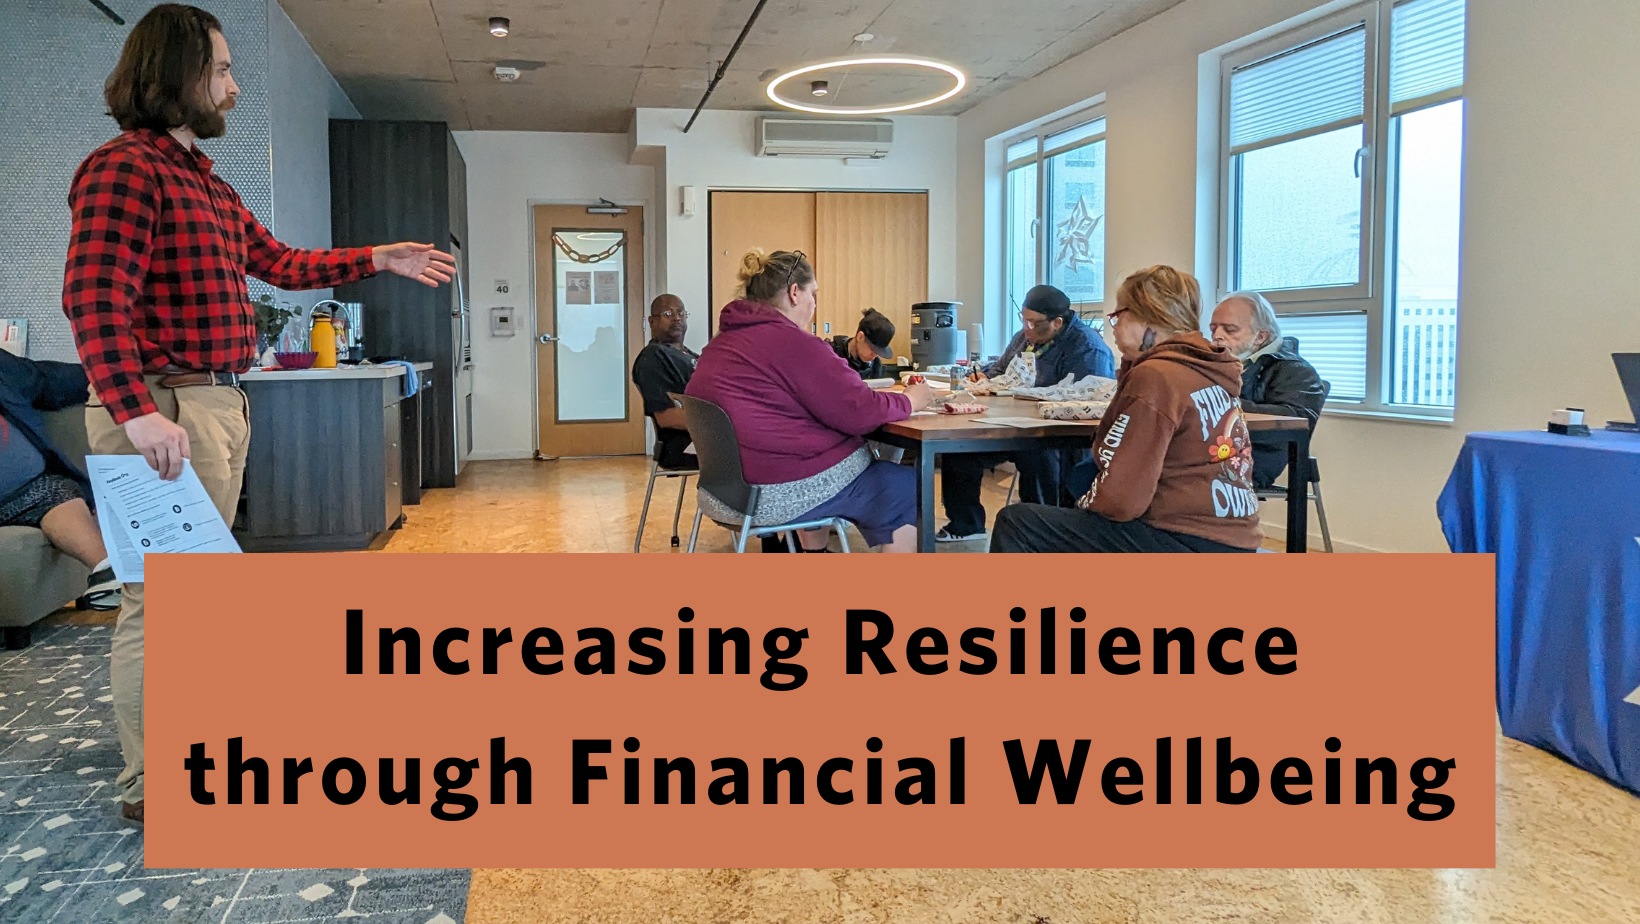 Increasing Resilience through Financial Wellbeing